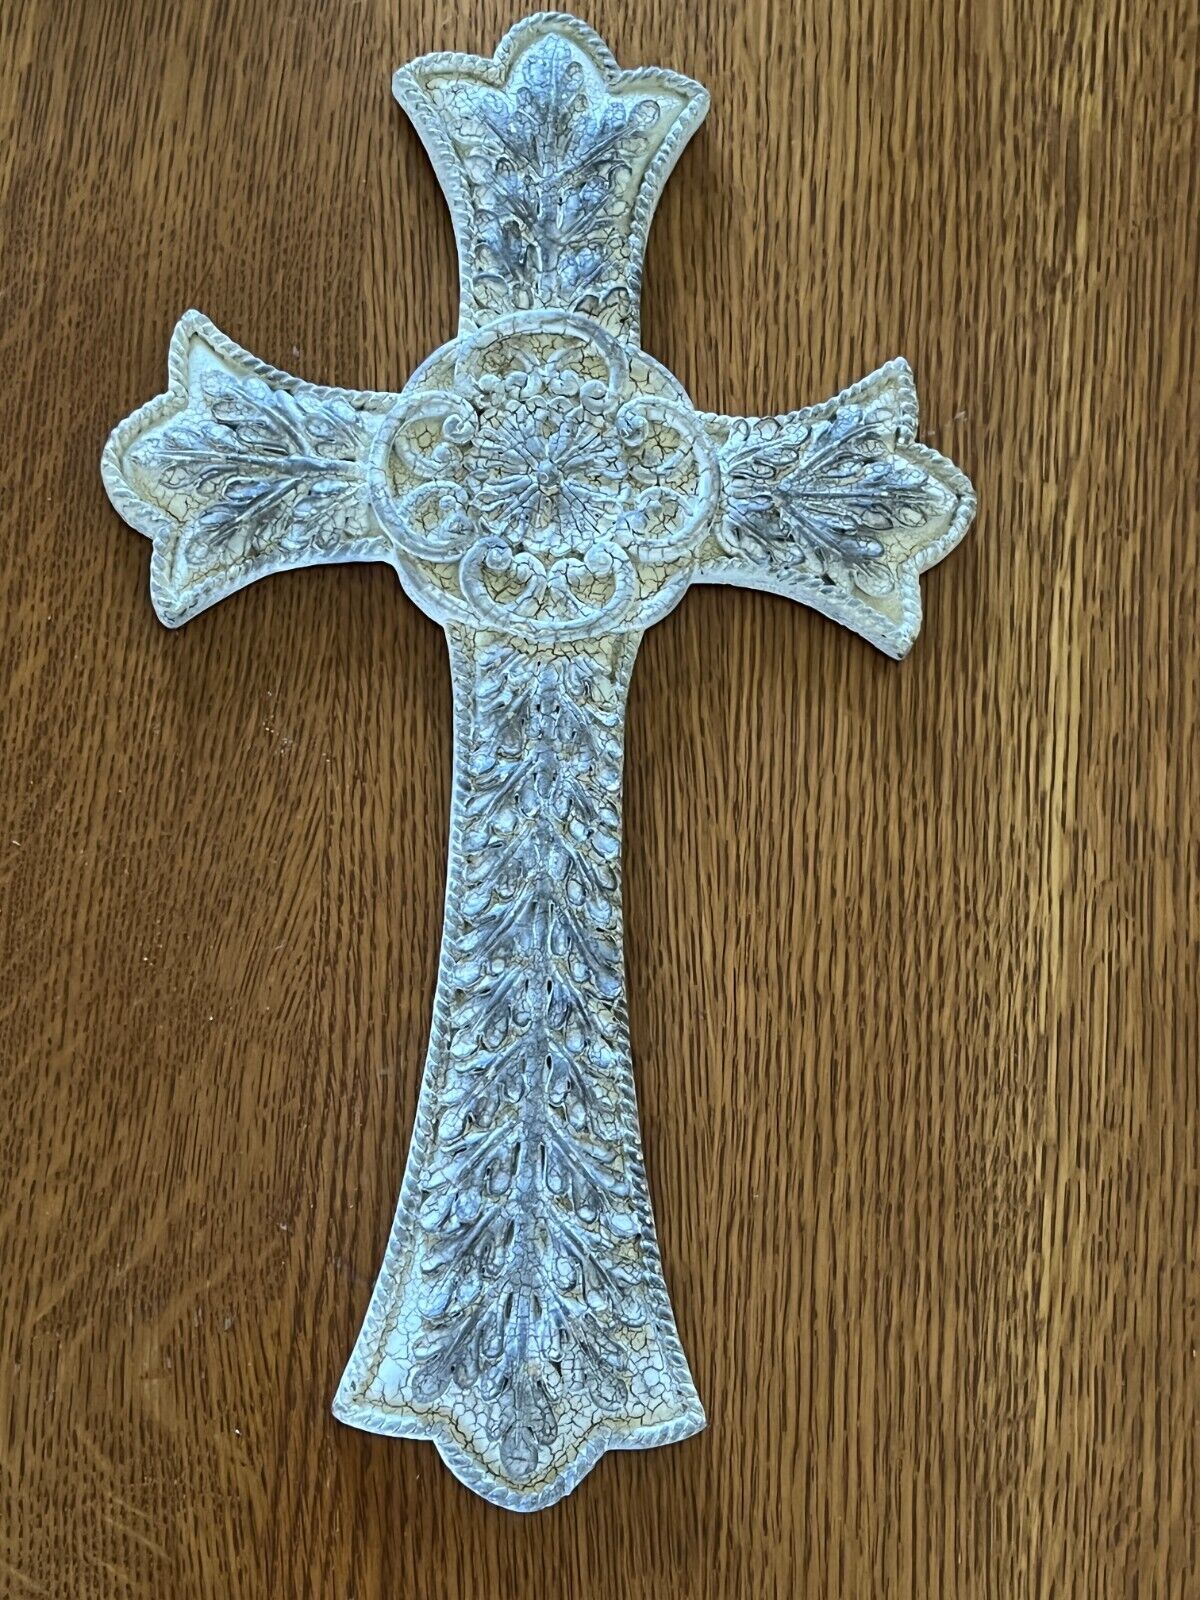 Ornate Rustic Cream & Gray Faux Crackle Paint Resin CROSS Wall Plaque  – 8 x 14